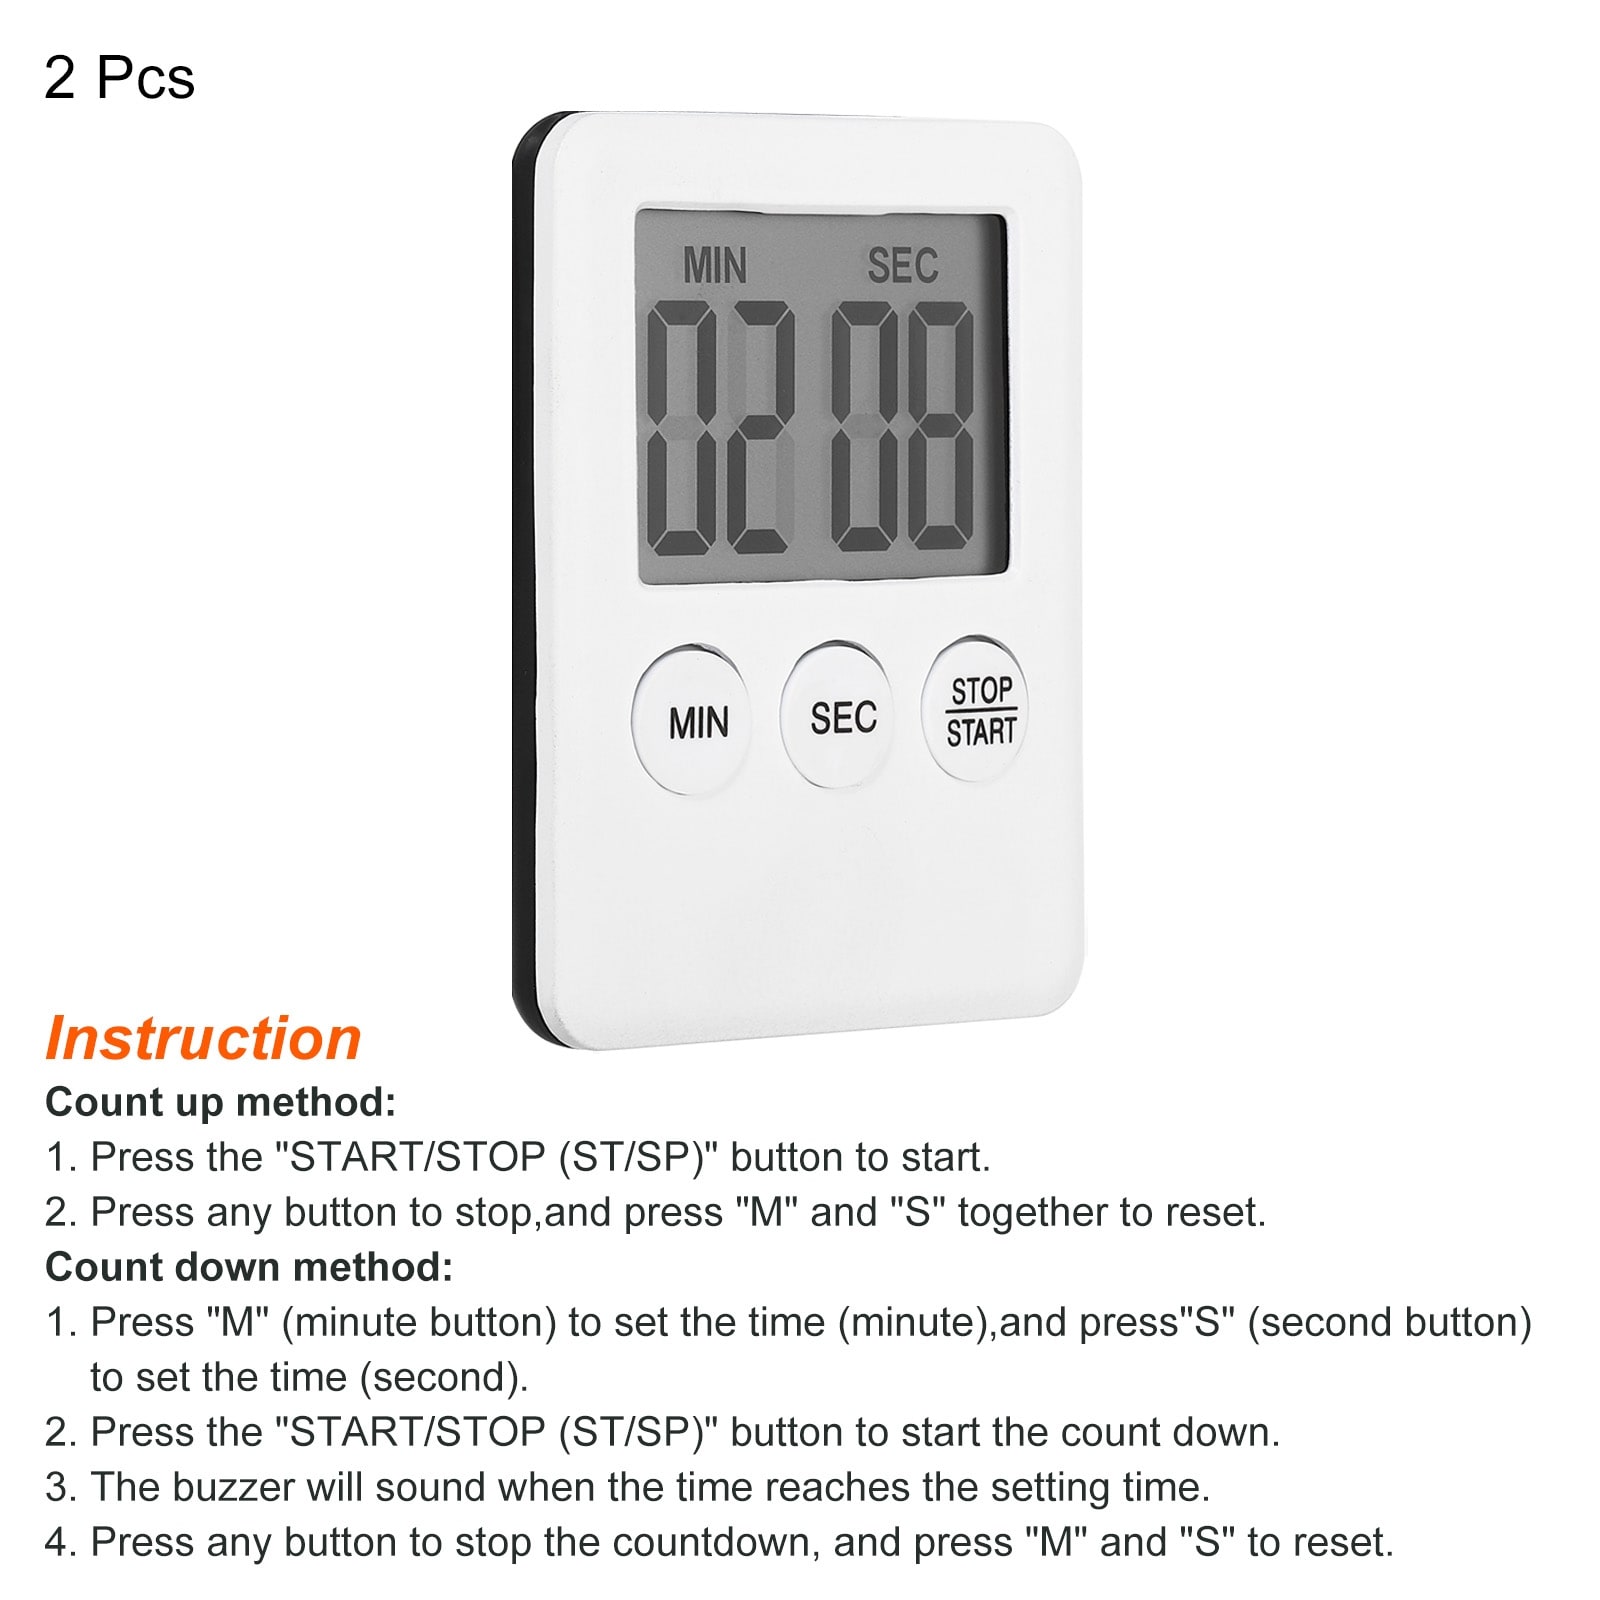  Kitchen Timer Magnetic Digital Timer Small Cooking